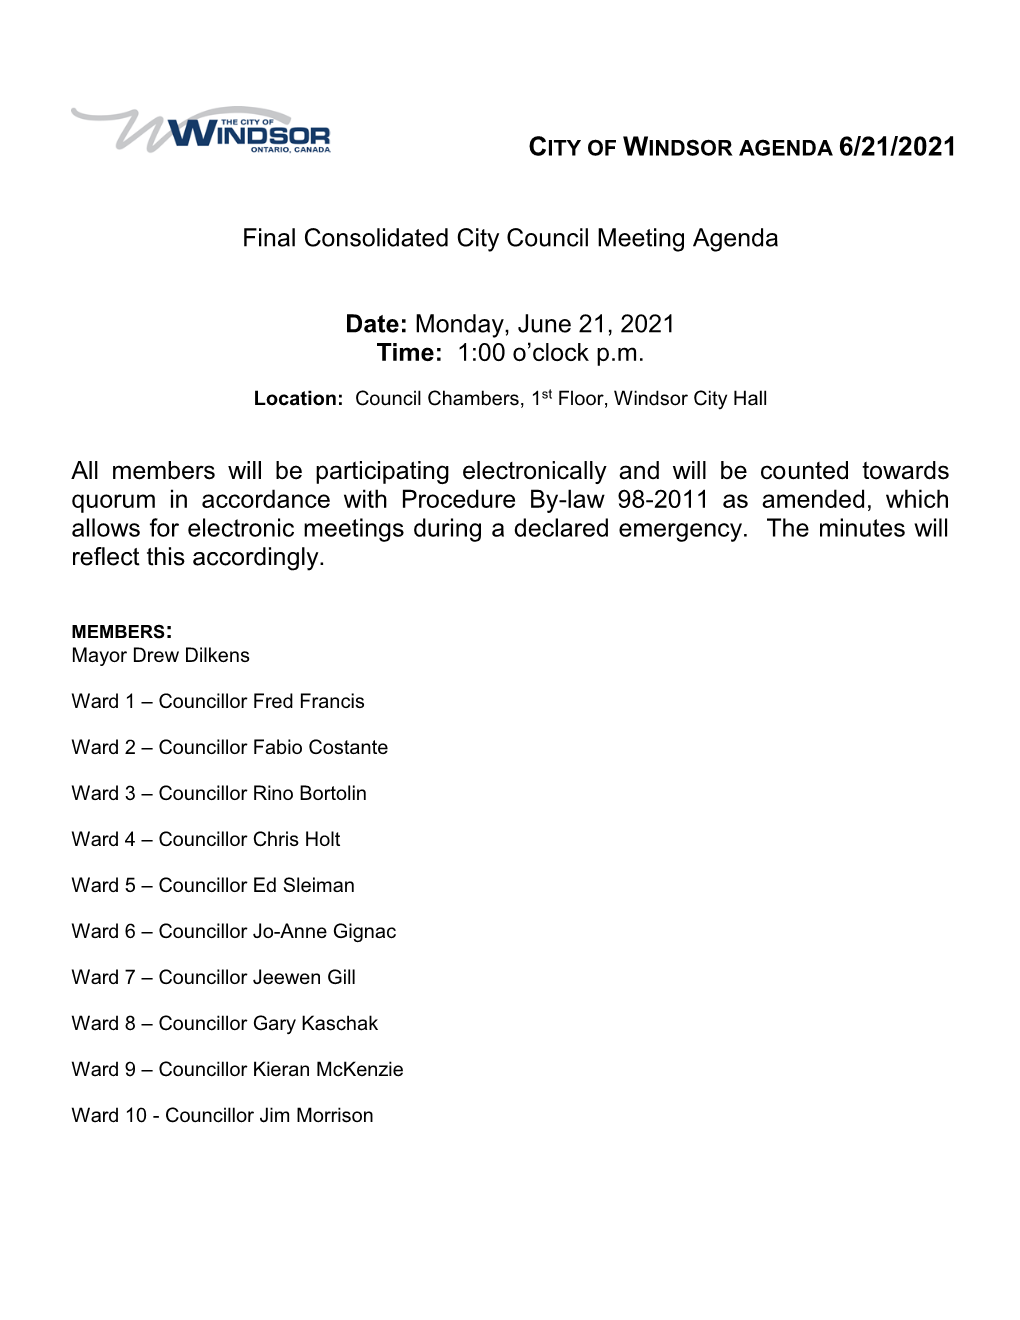 Final Consolidated City Council Meeting Agenda Date: Monday, June 21, 2021 Time